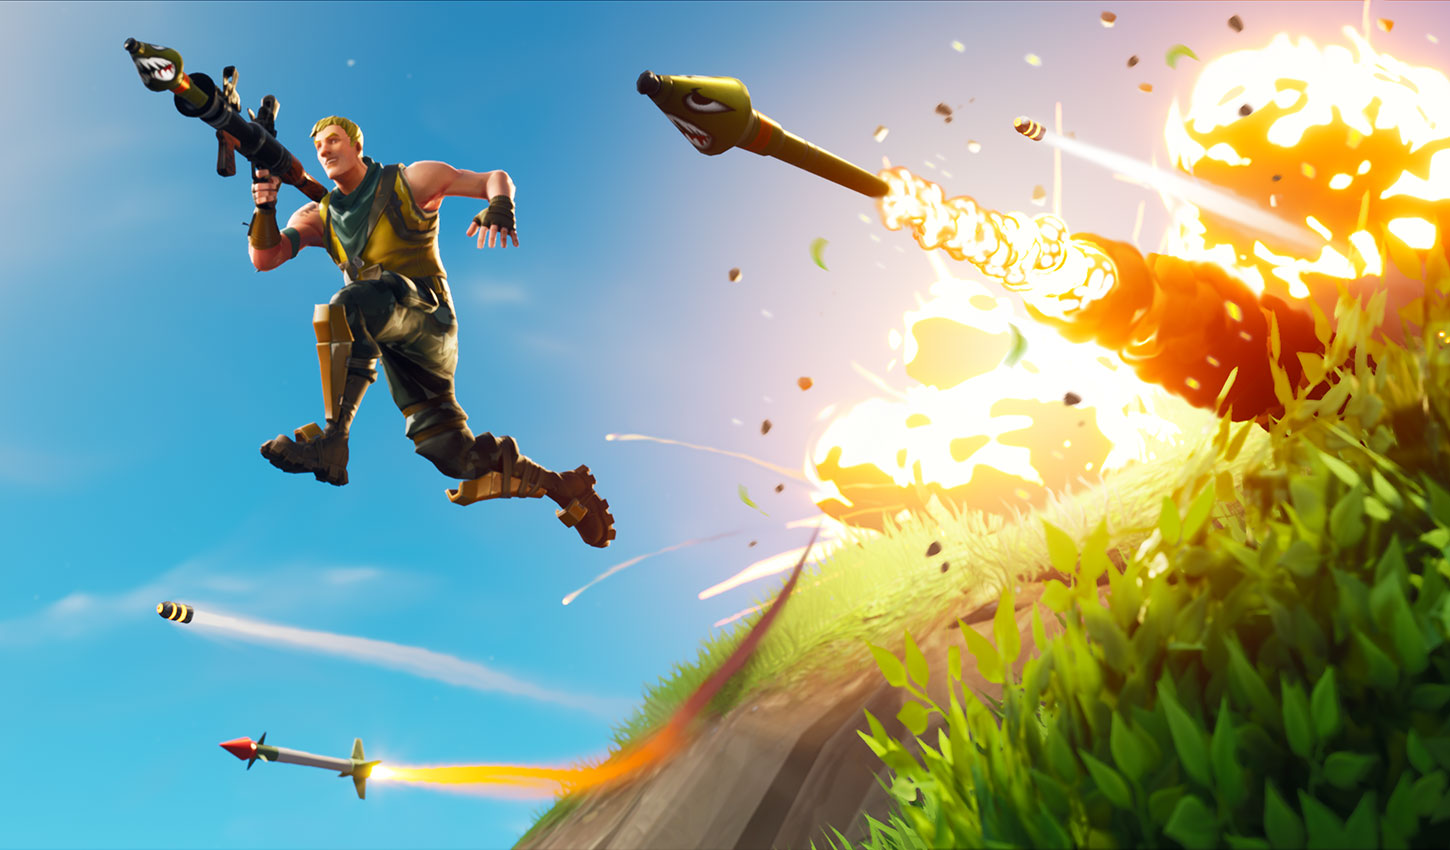 Fortnite Expands To Android But Epic Skirts Google Play Store With - fortnite expands to android but epic skirts google play store with custom installer